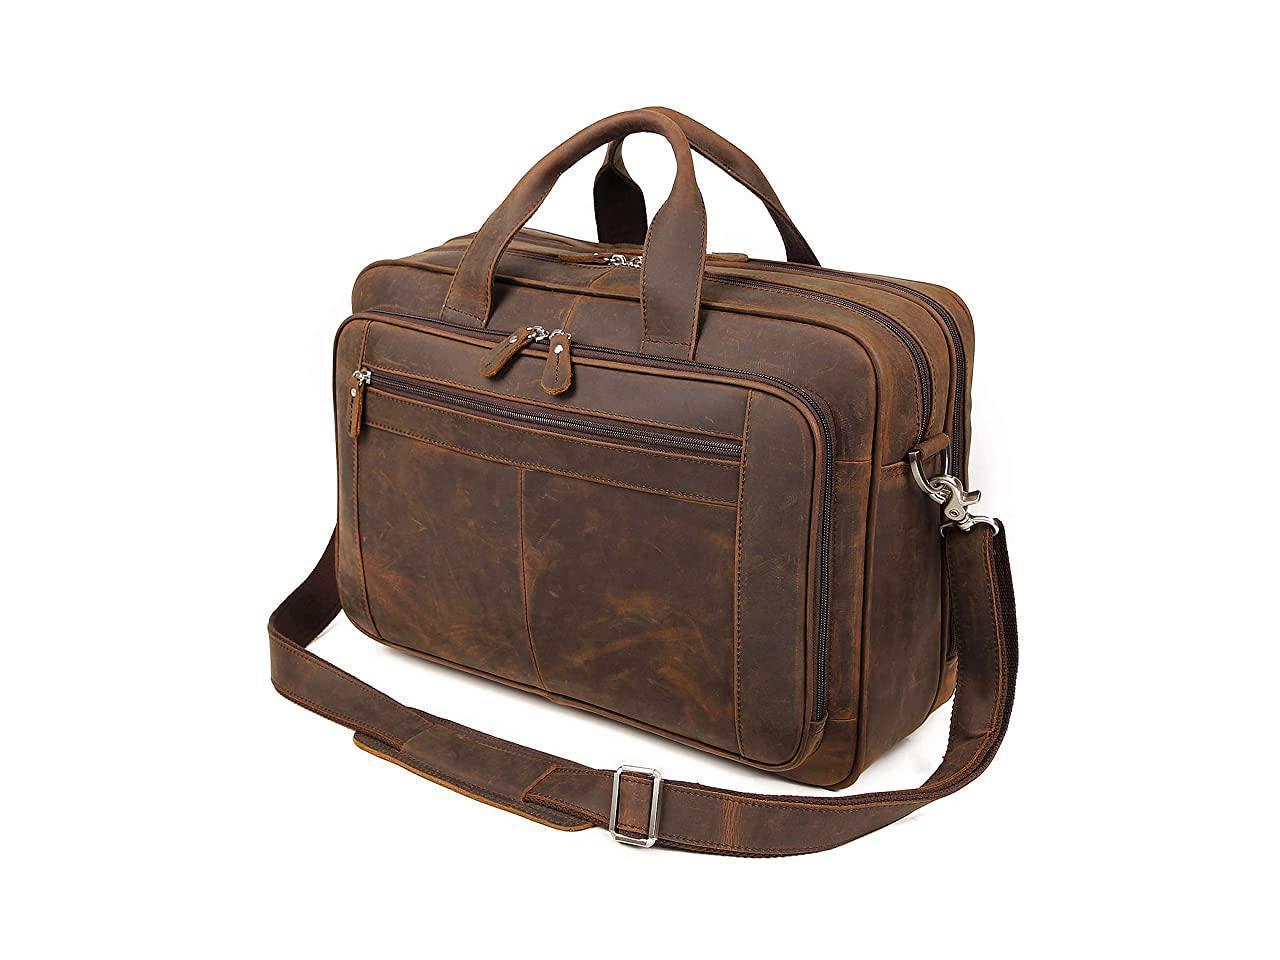 Business Travel Briefcase Genuine Leather Duffel Bags for Men Laptop ...